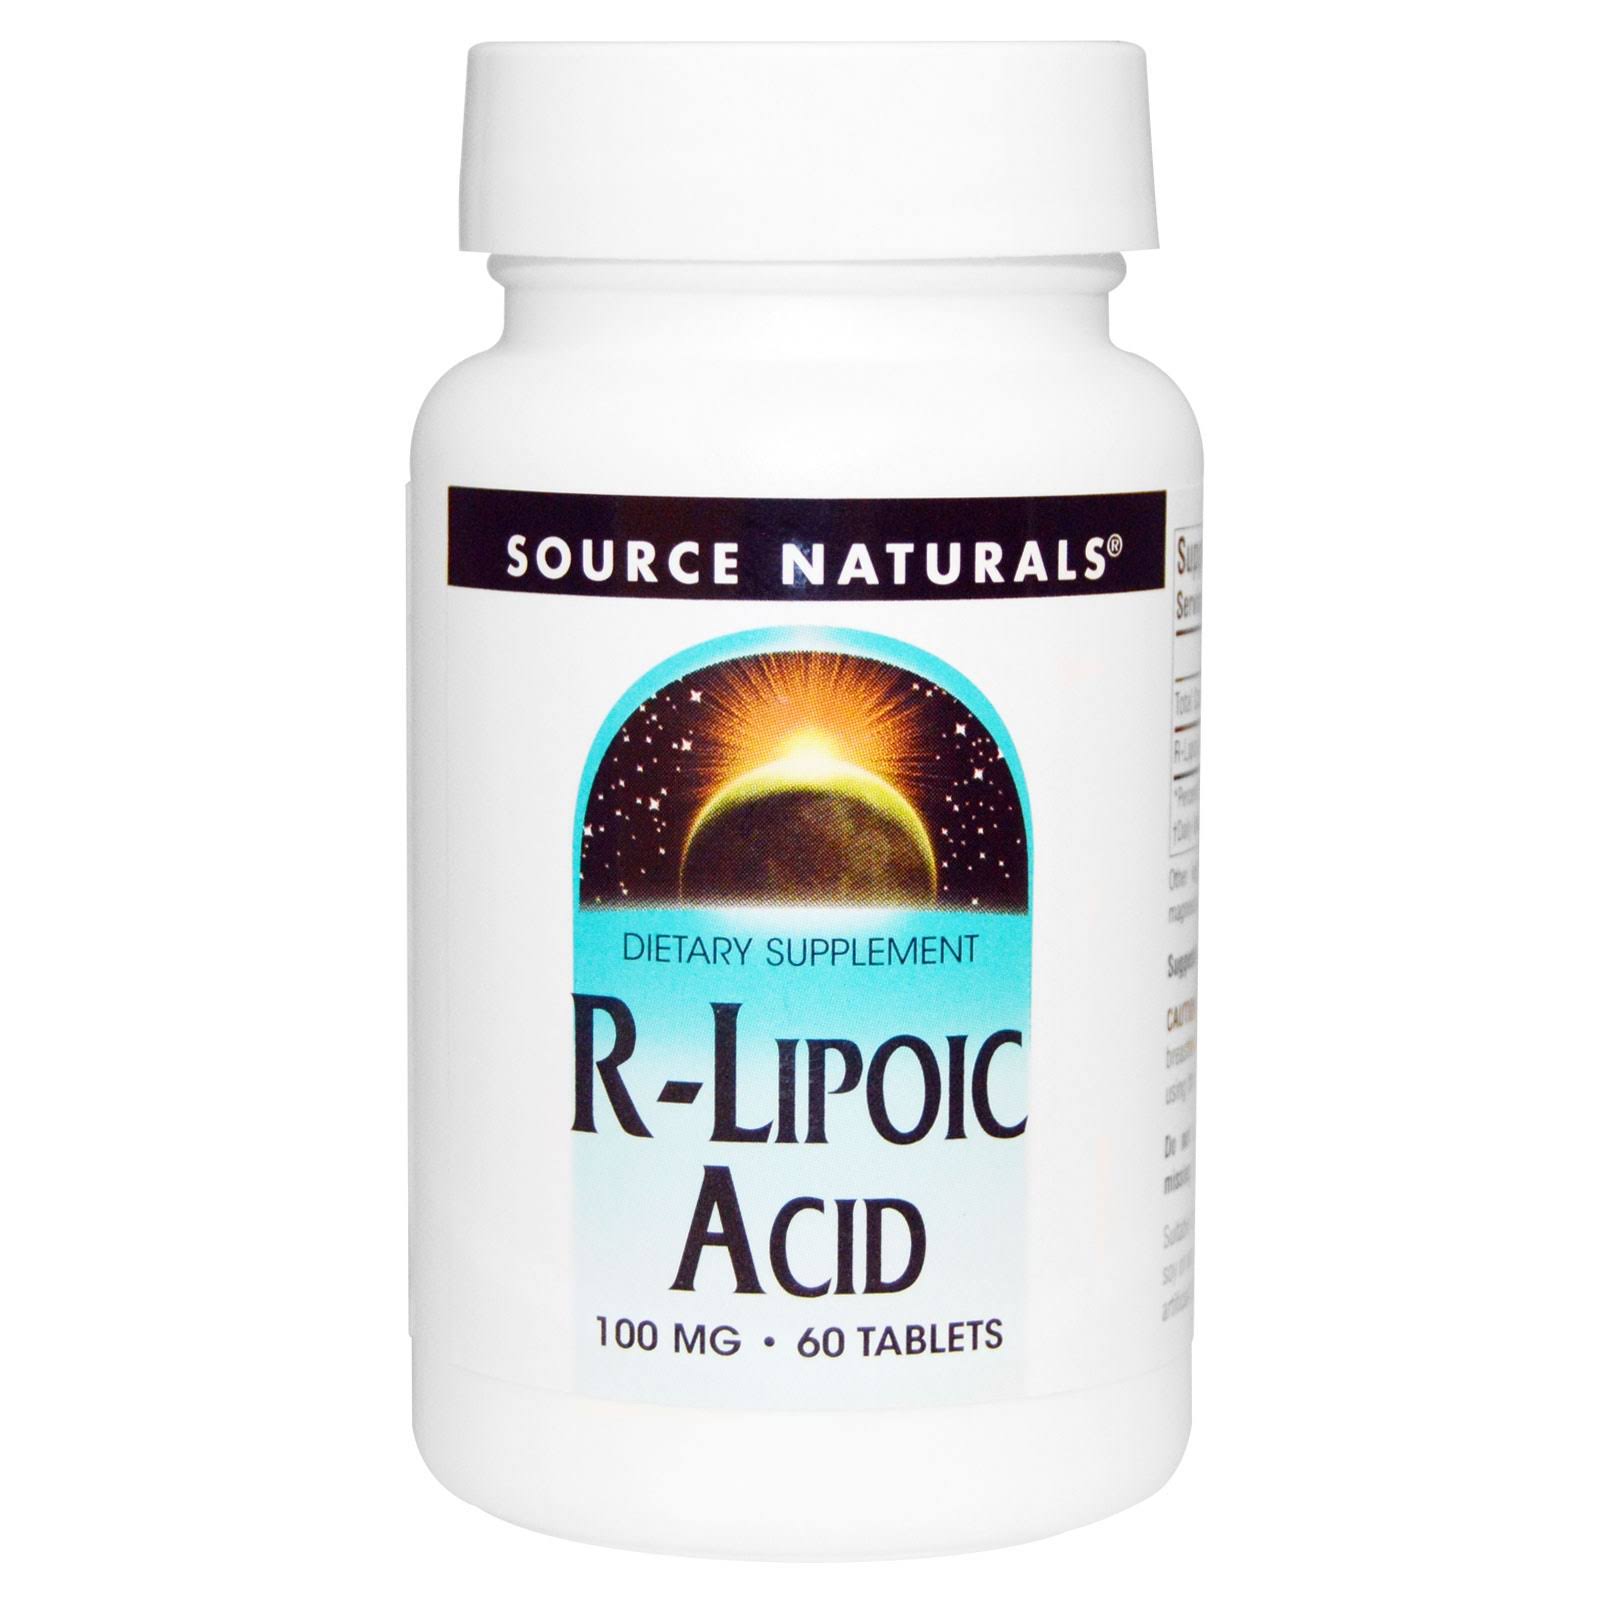 Source Naturals R Lipoic Acid Dietary Supplement - 60 Tablet